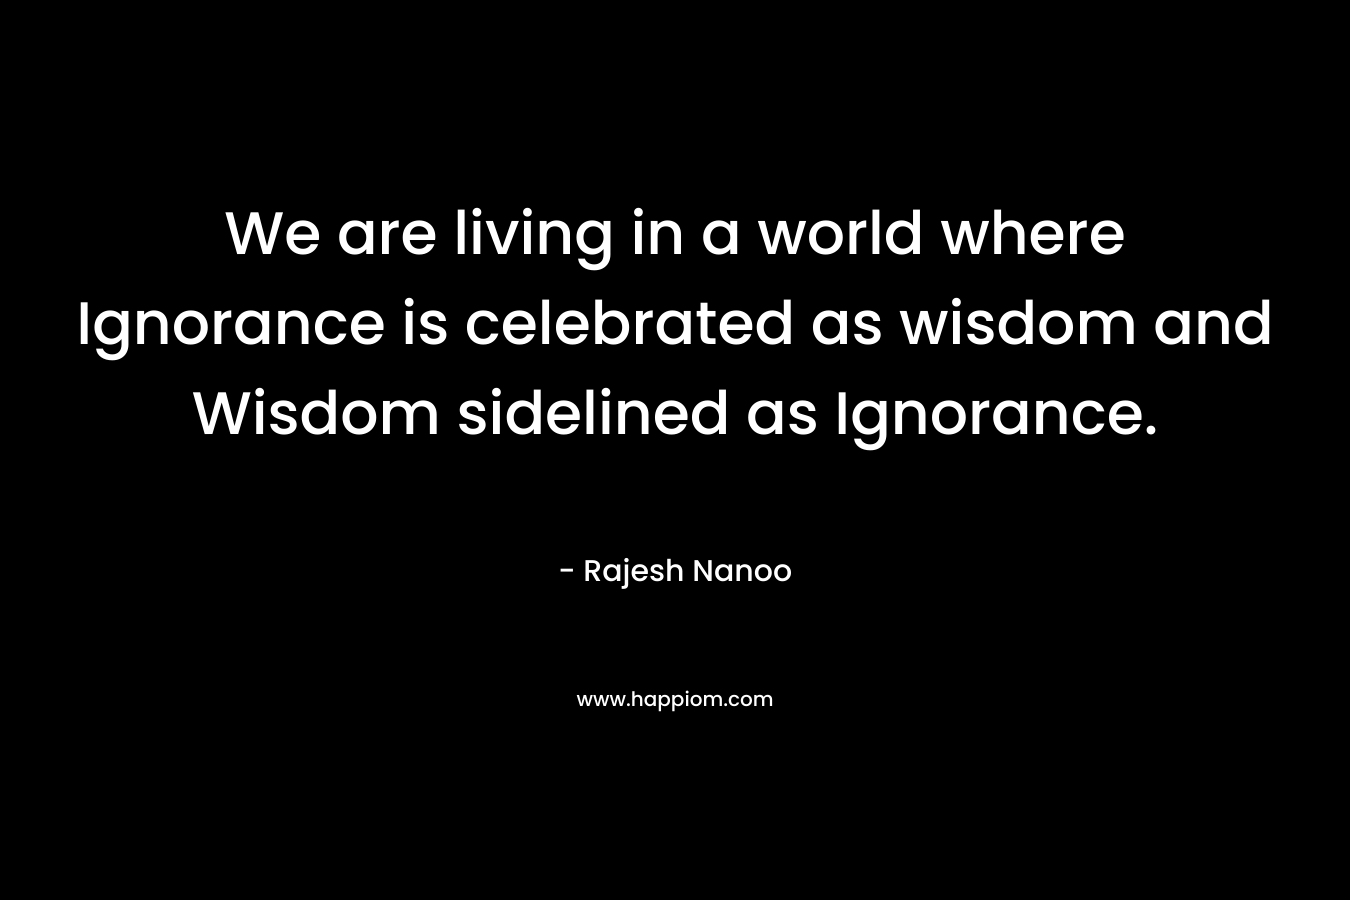 We are living in a world where Ignorance is celebrated as wisdom and Wisdom sidelined as Ignorance. – Rajesh Nanoo